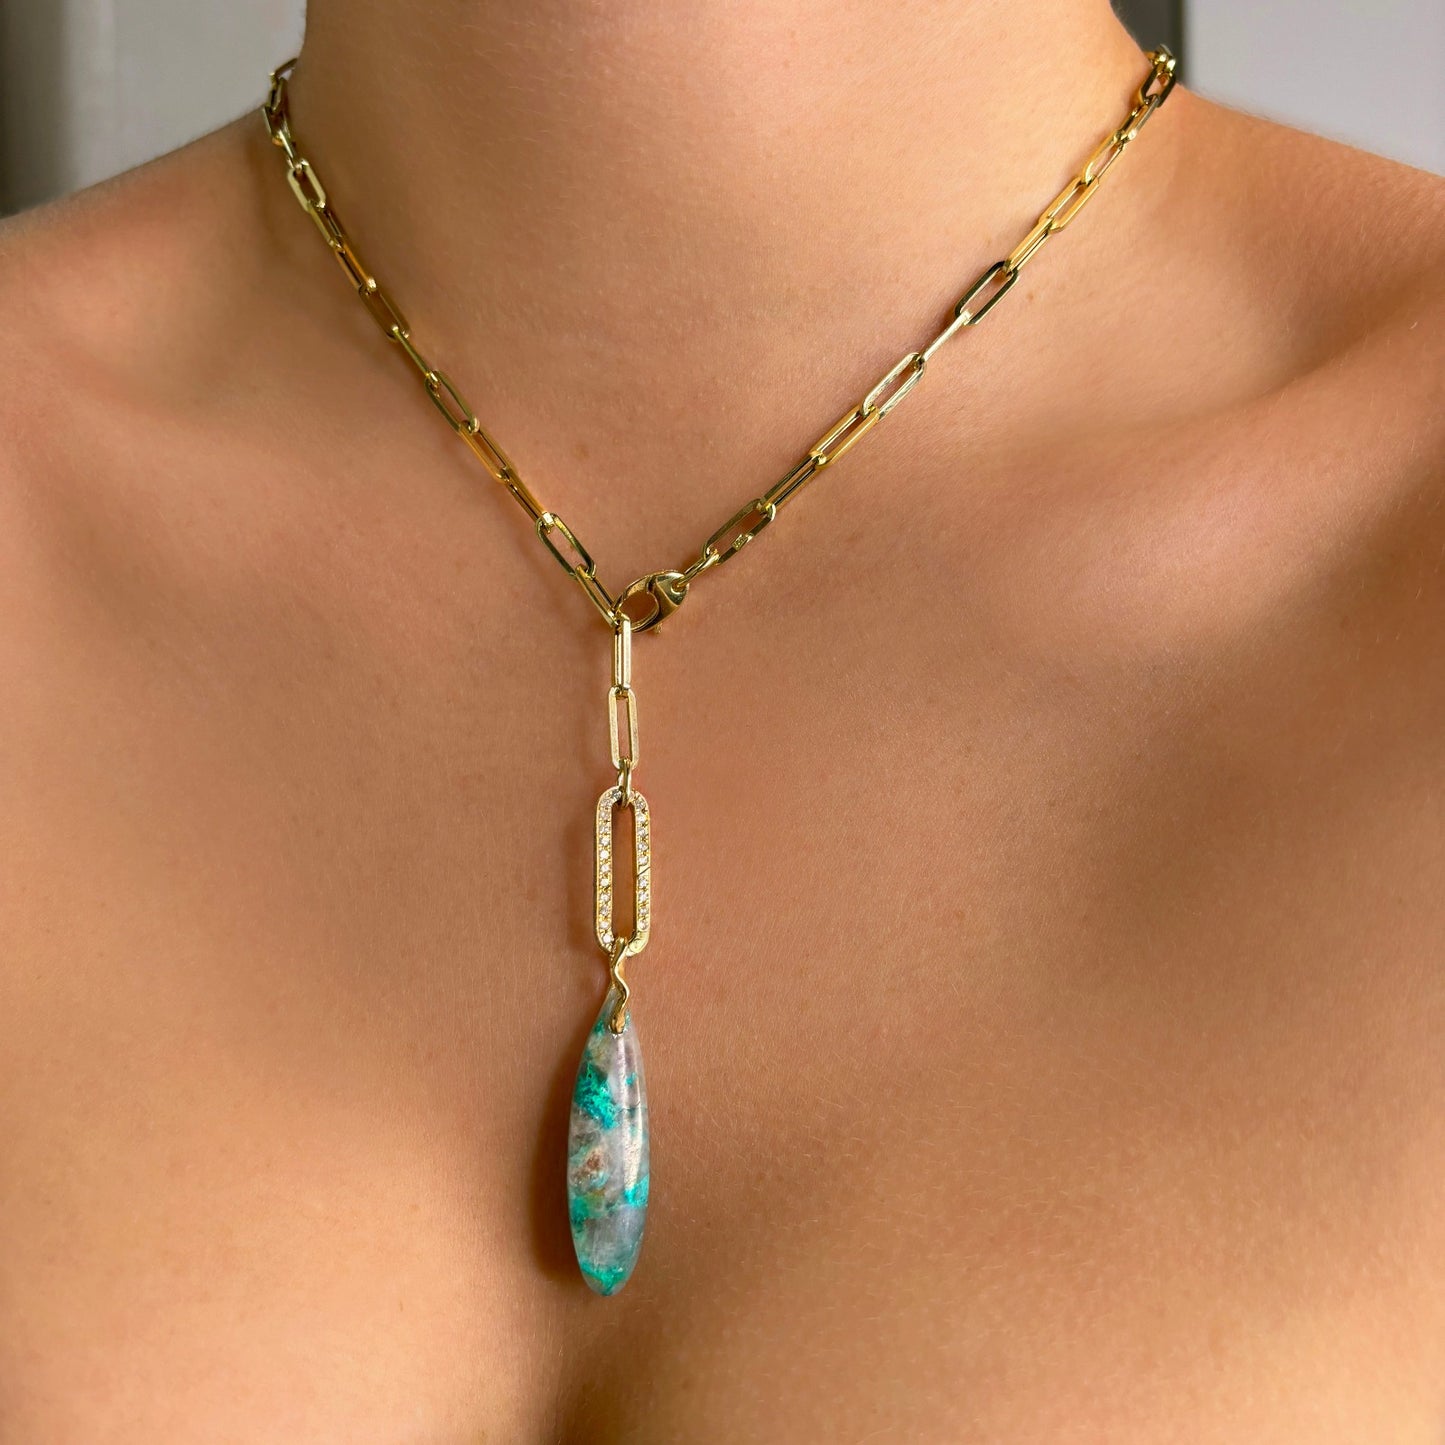 Chrysocolla in Quartz Surfboard Charm. Styled on a neck hanging from a pave oval charm lock on a paperclip chain necklace.